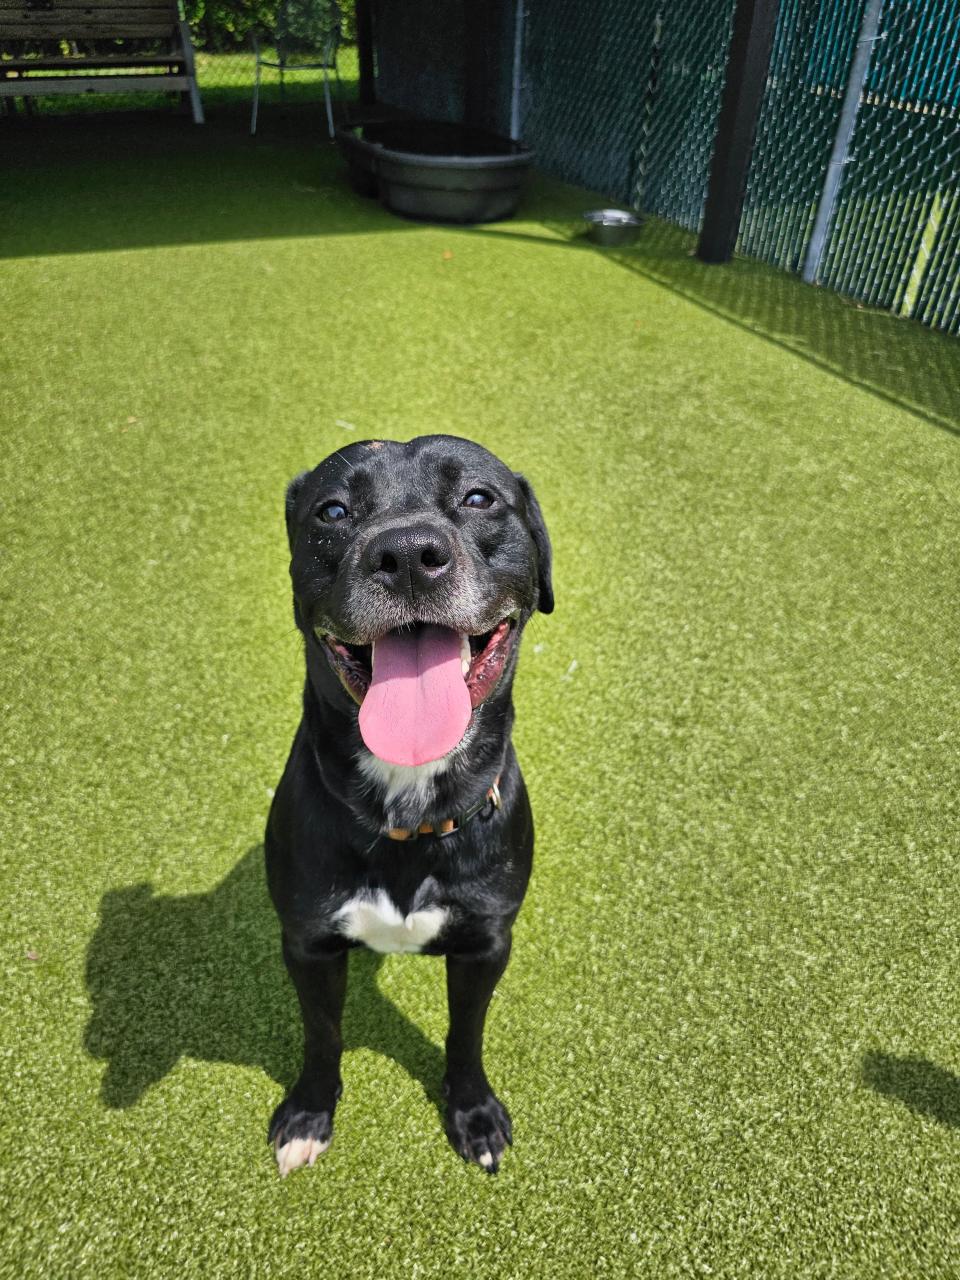 Gucci’s a little bit reserved around new people, but is good when he gets to know you. He likes to play with toys, walks great on a leash and loves to explore new places. He has never been formally trained. His fears are getting his nails cut, men and cats.